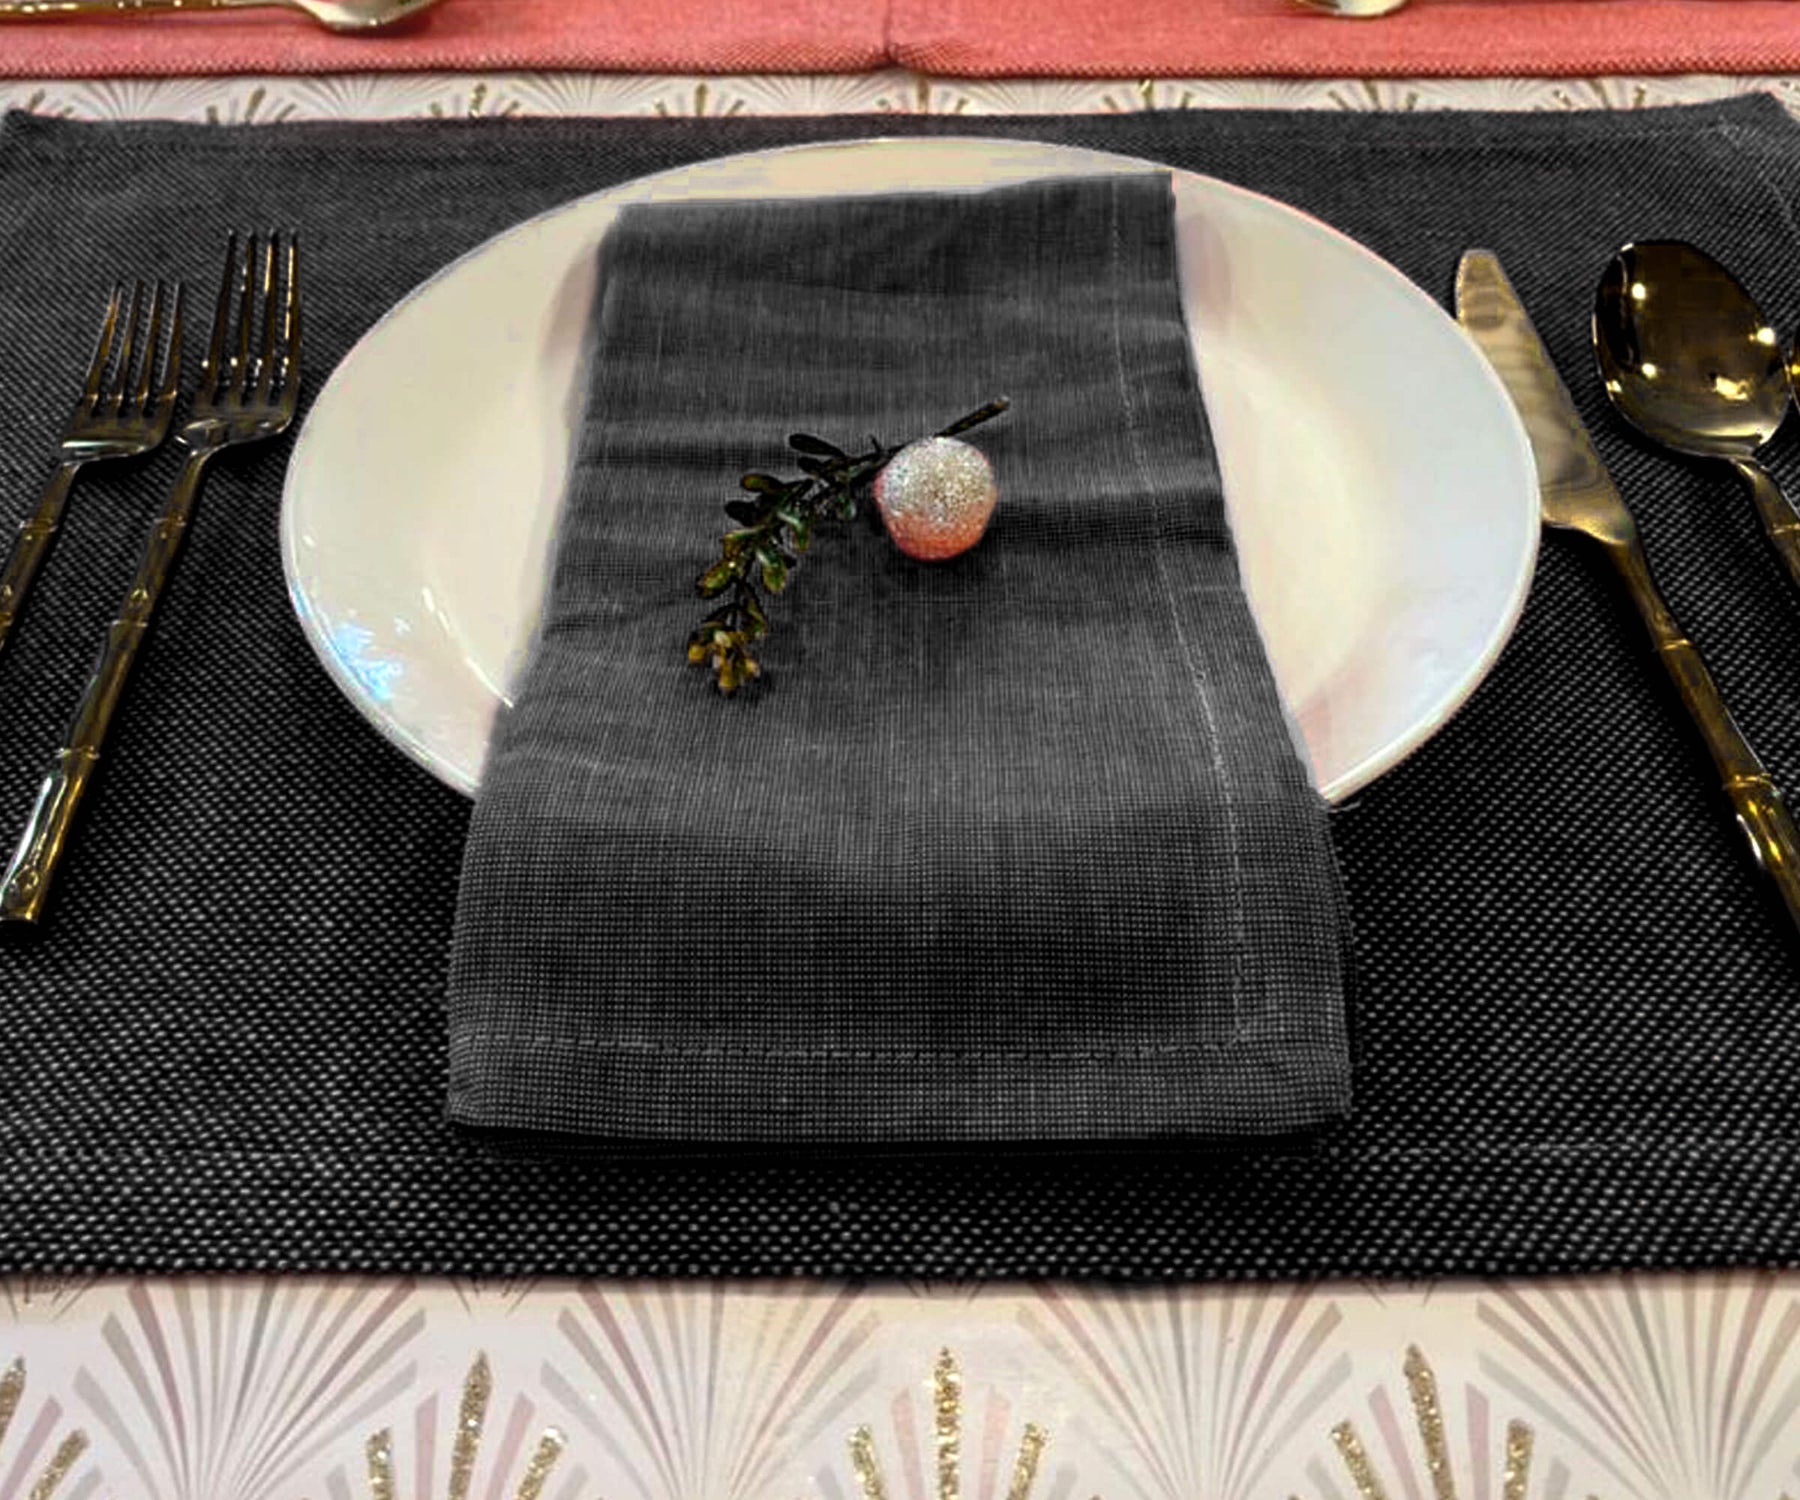 The black fabric napkins can be used for everyday meals, black cloth napkins, plain napkins